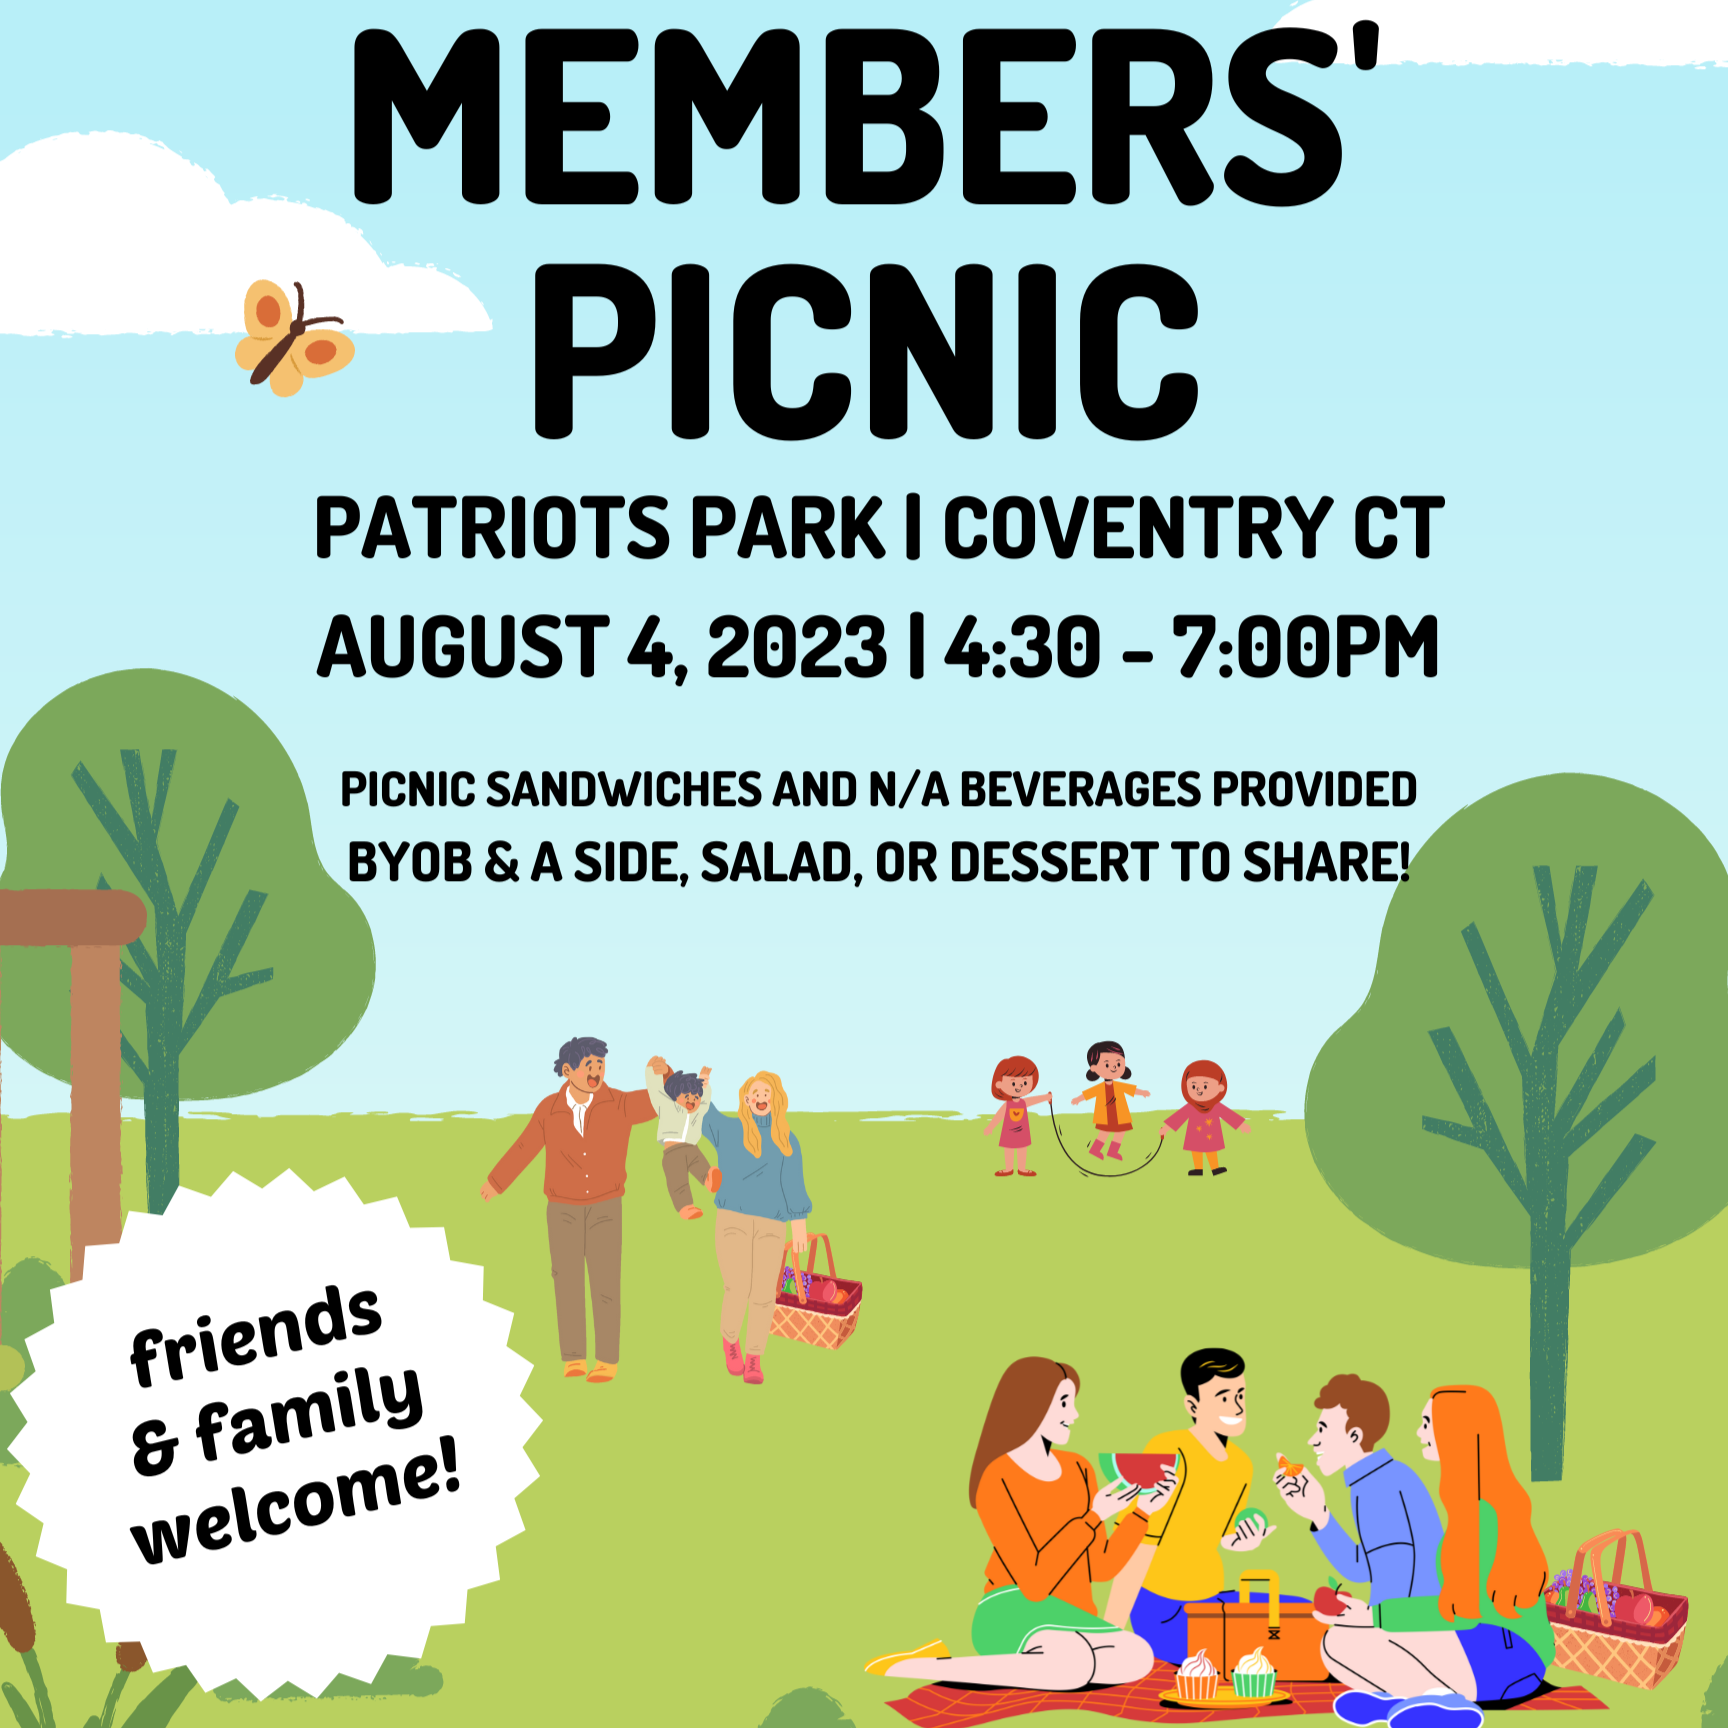 Members’ Picnic at Patriots Park, Coventry – August 4th from 4:30 – 7:00PM